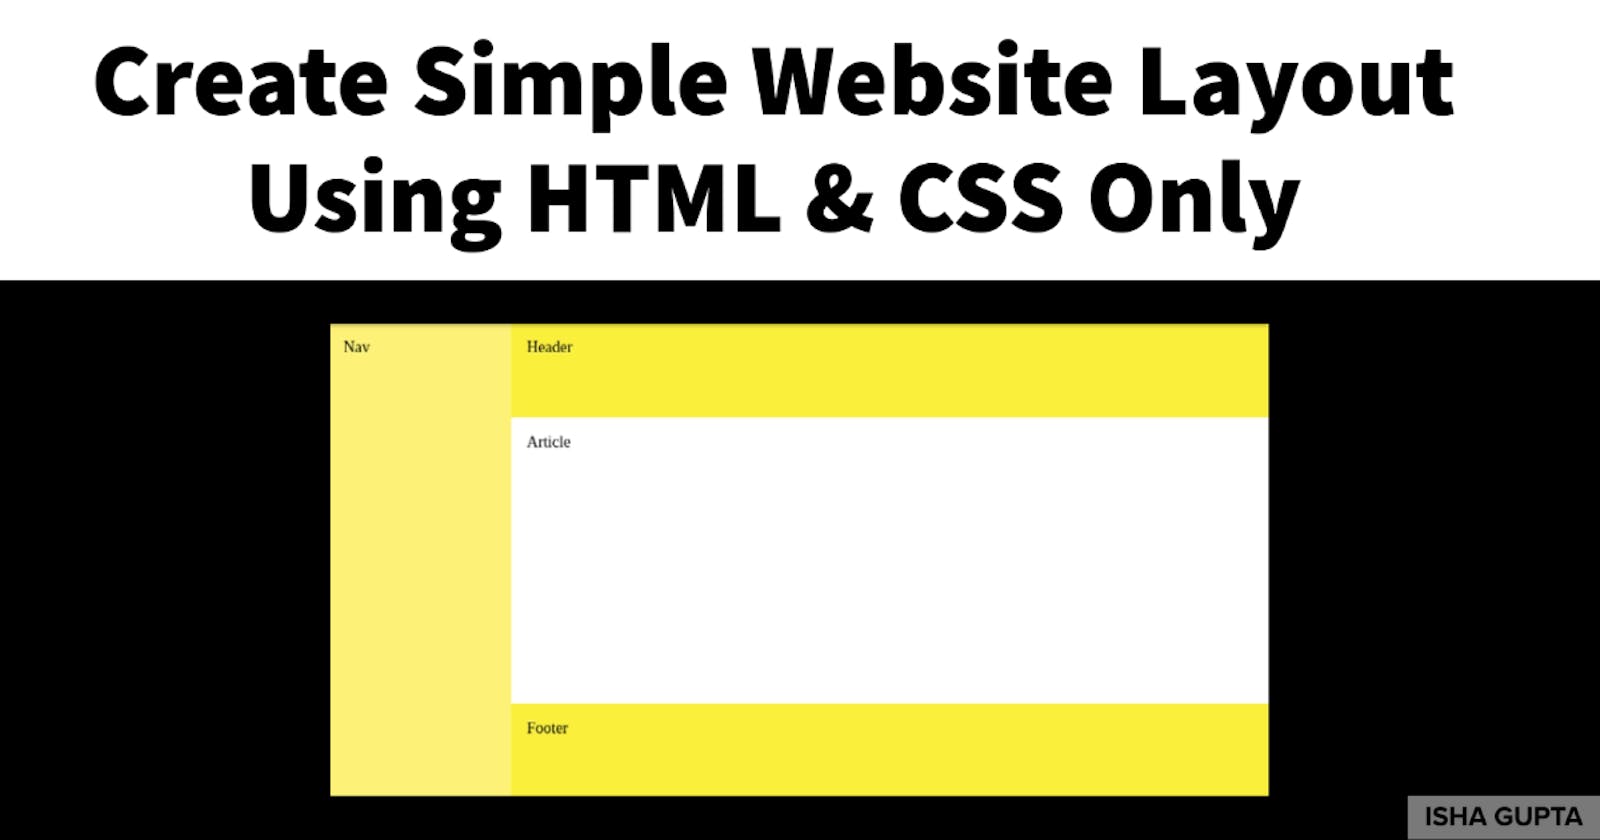 Create Simple Website Layout Using HTML & CSS Only